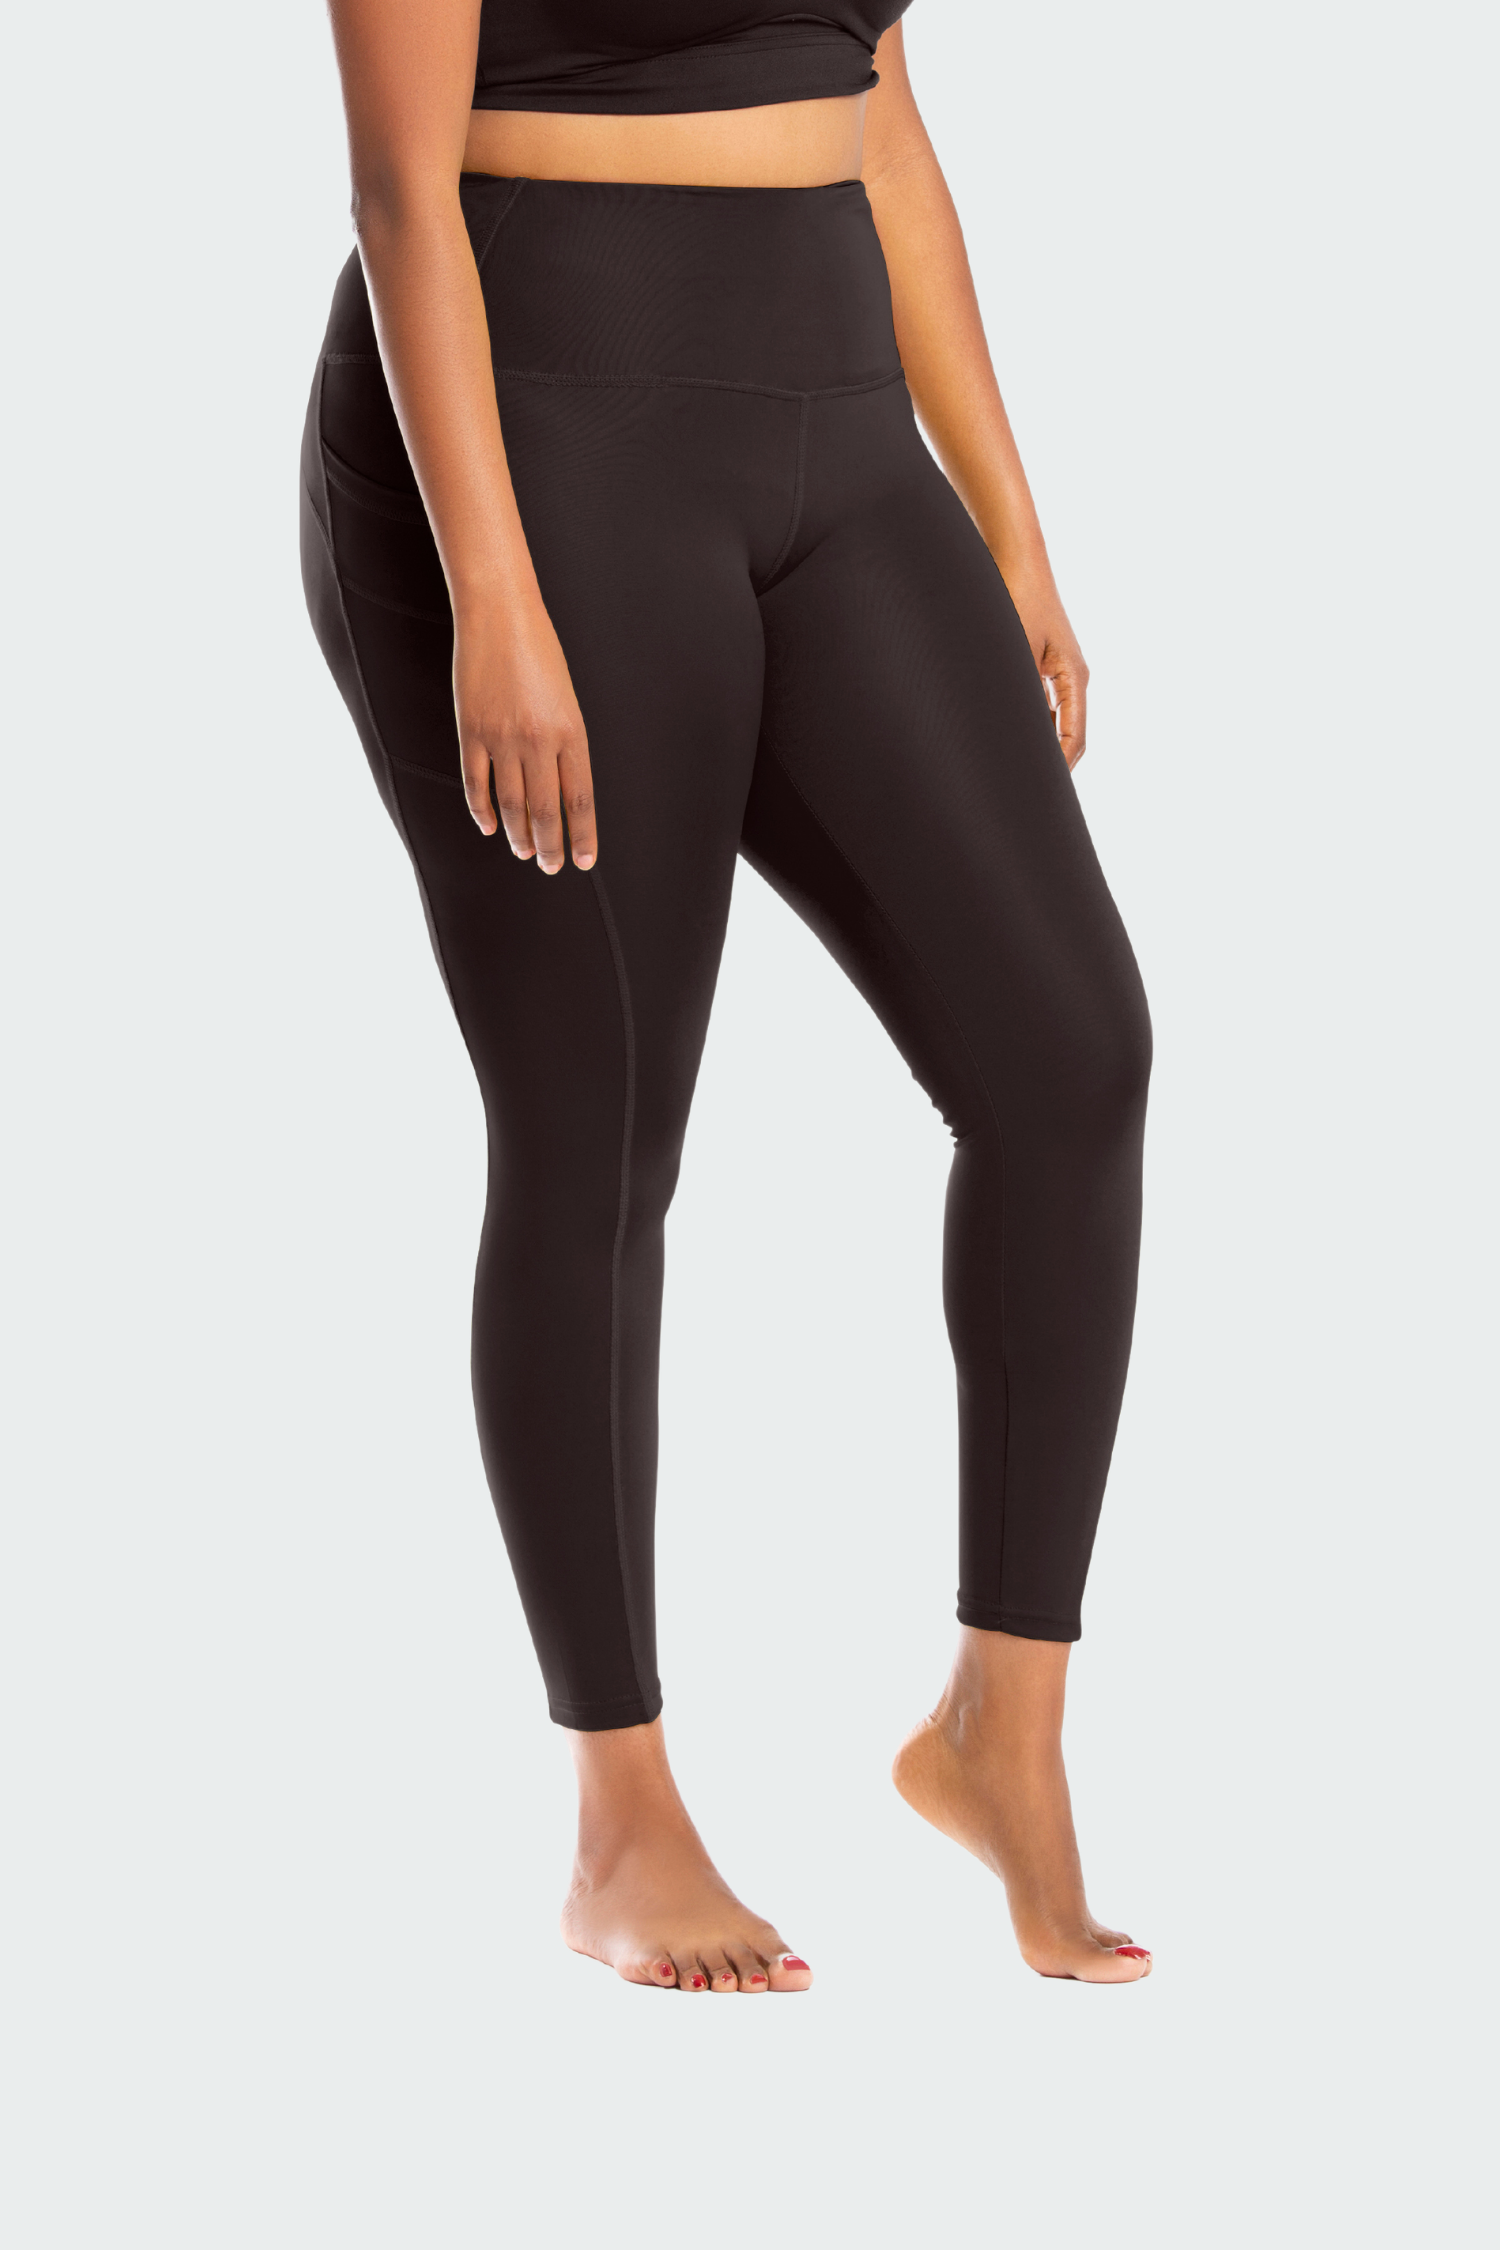 Plus Size Black Wet Look Stretch Leggings | Yours Clothing